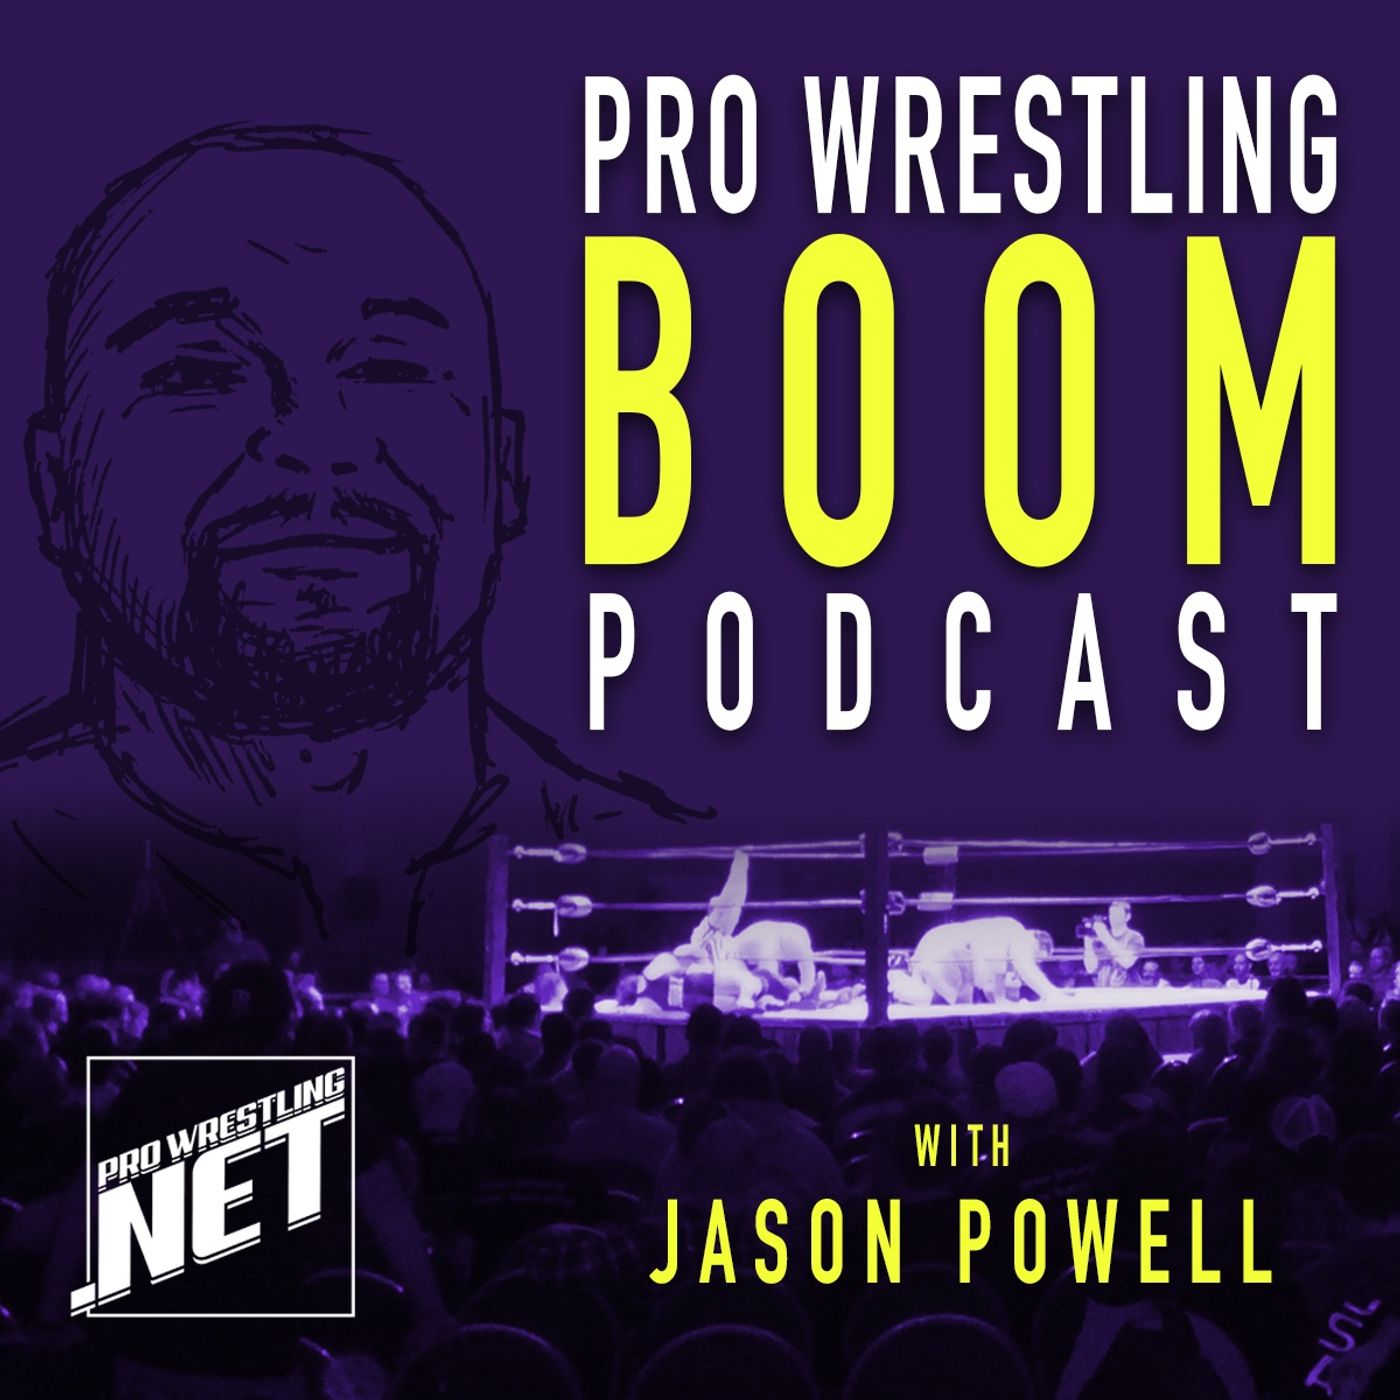 09/03 Pro Wrestling Boom Podcast With Jason Powell (Episode 173): Jake Barnett co-hosts the Dot Net Weekly combo show